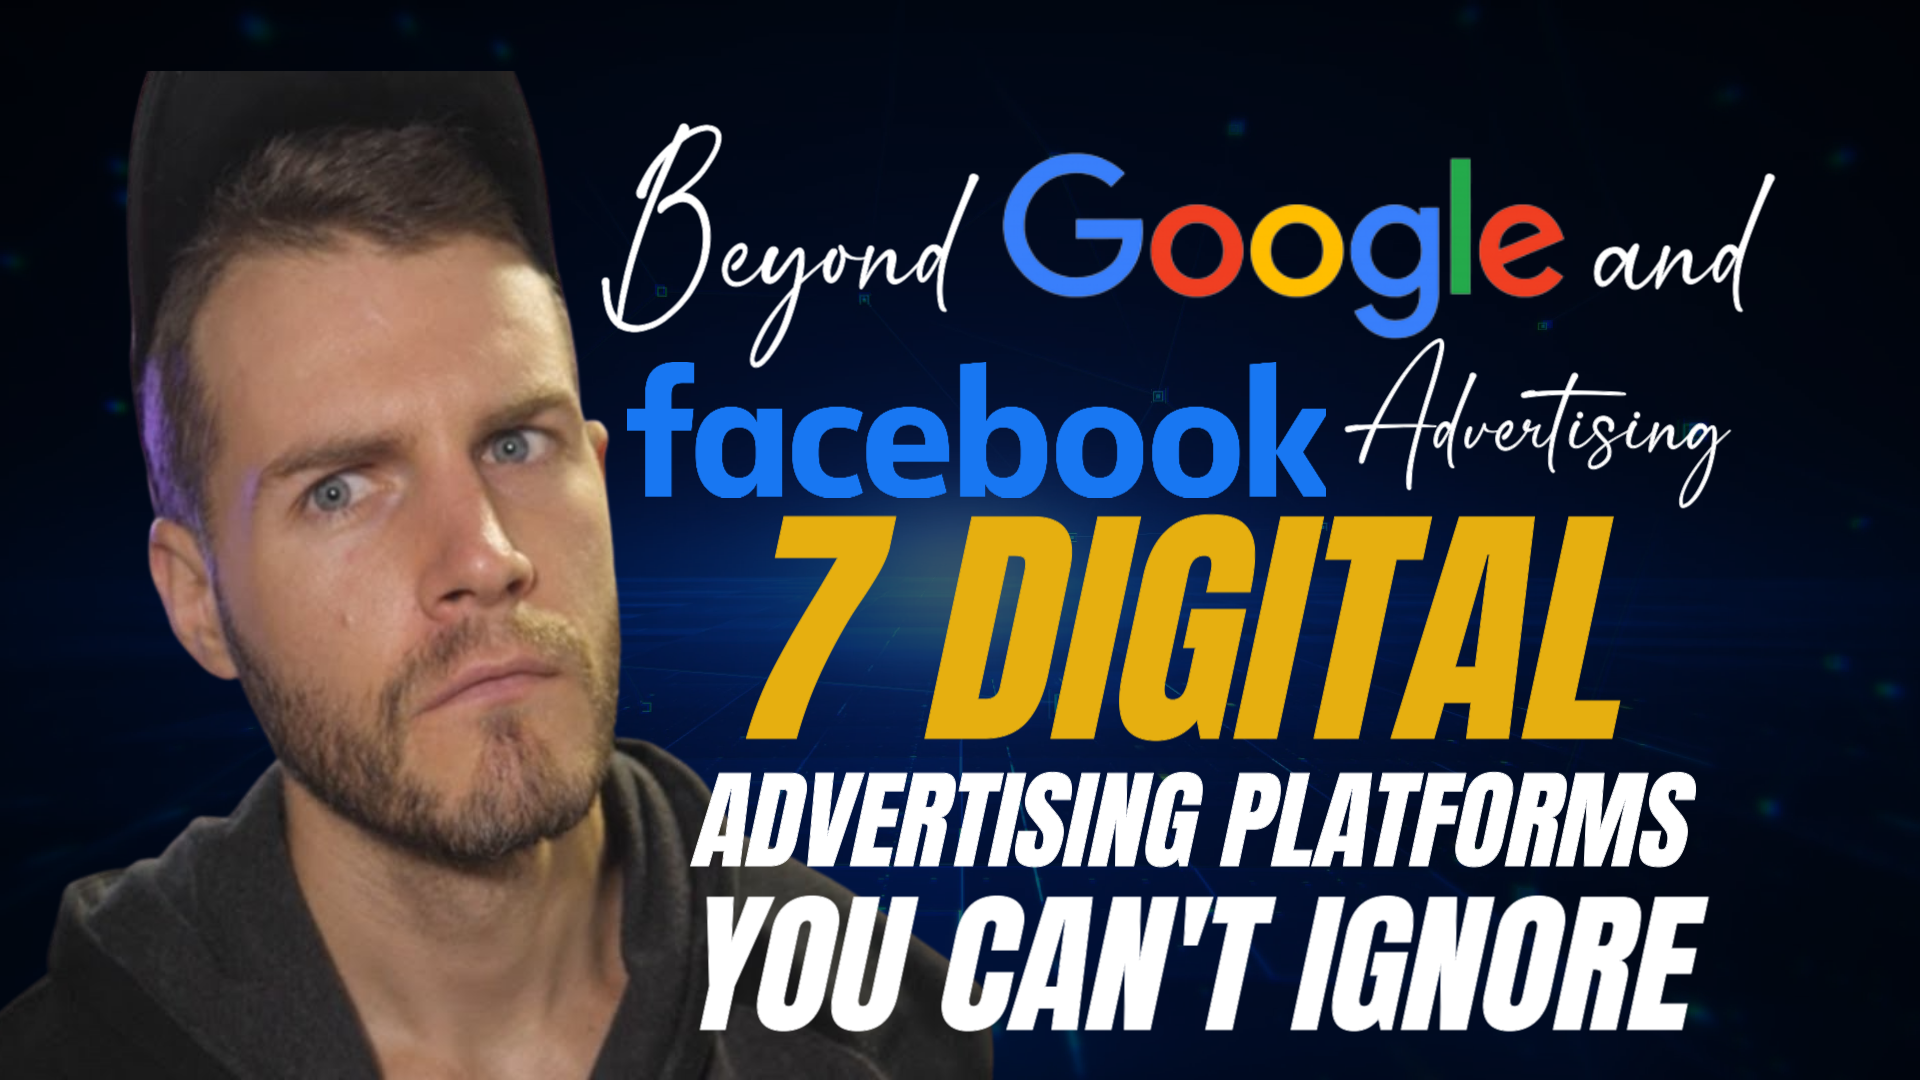 Beyond Google and Facebook Advertising: 7 Digital Advertising Platforms You Can’t Ignore